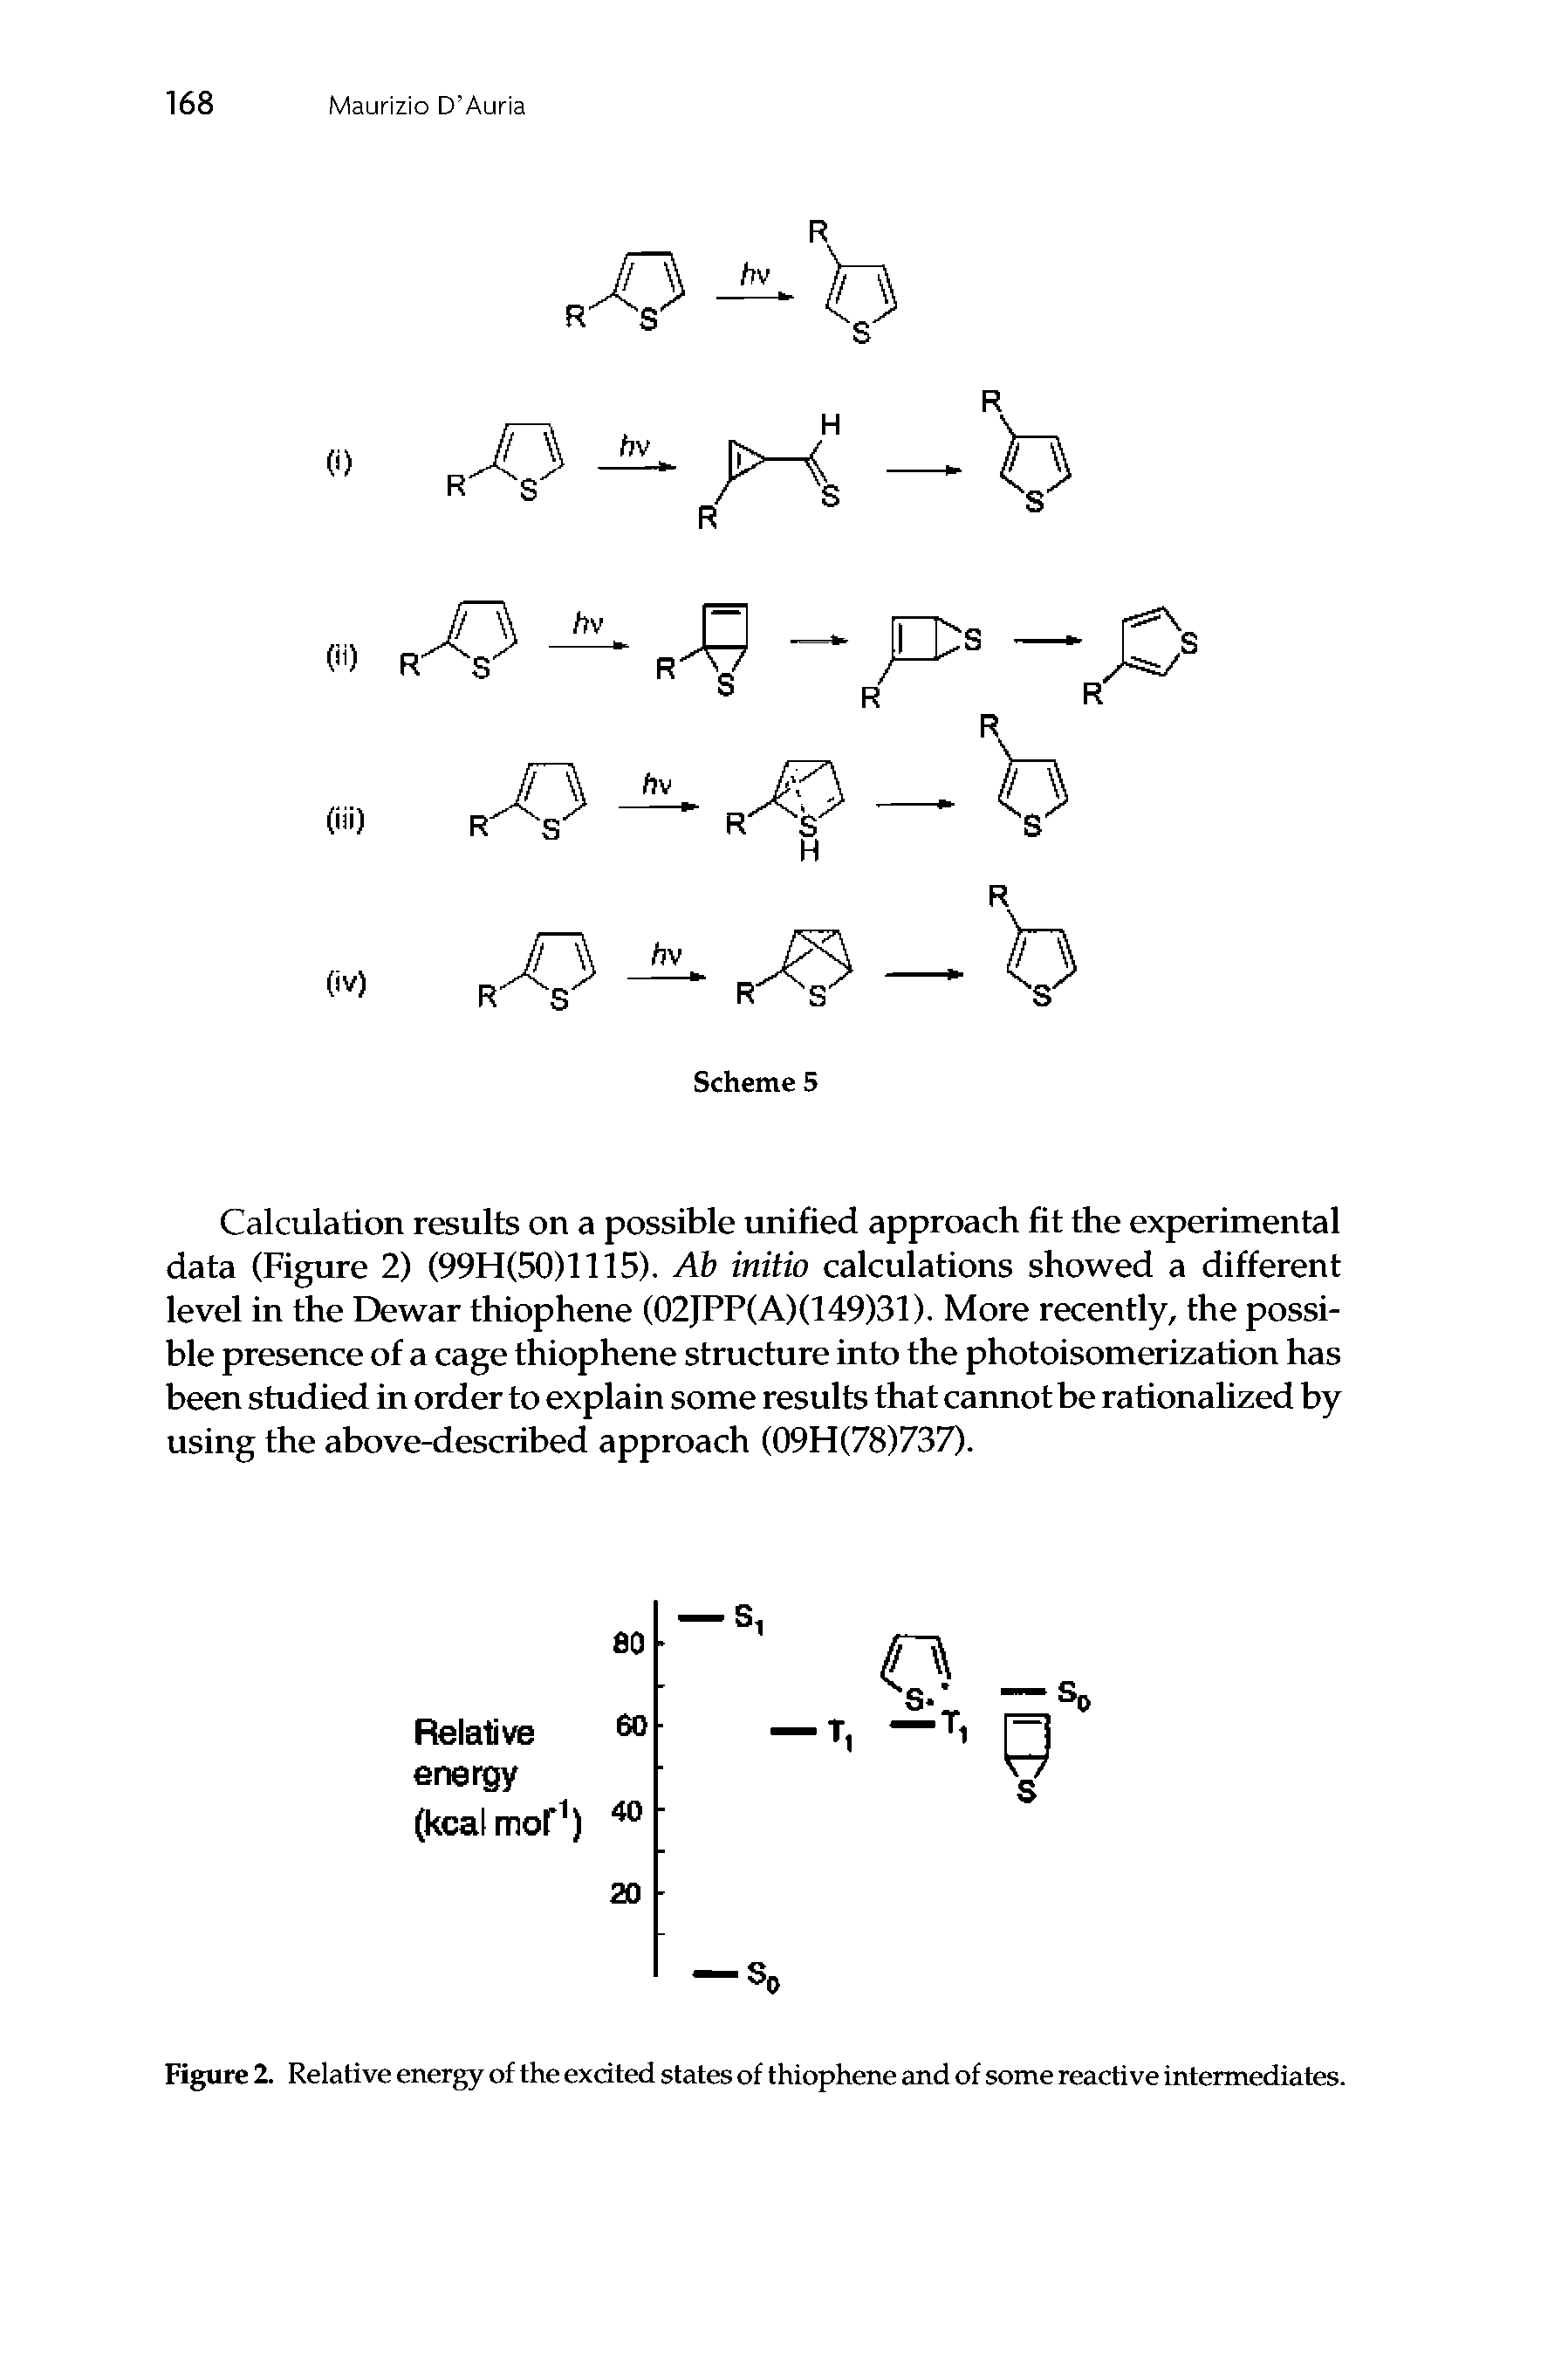 Figure 2. Relative energy of the exdted states of thiophene and of some reactive intermediates.